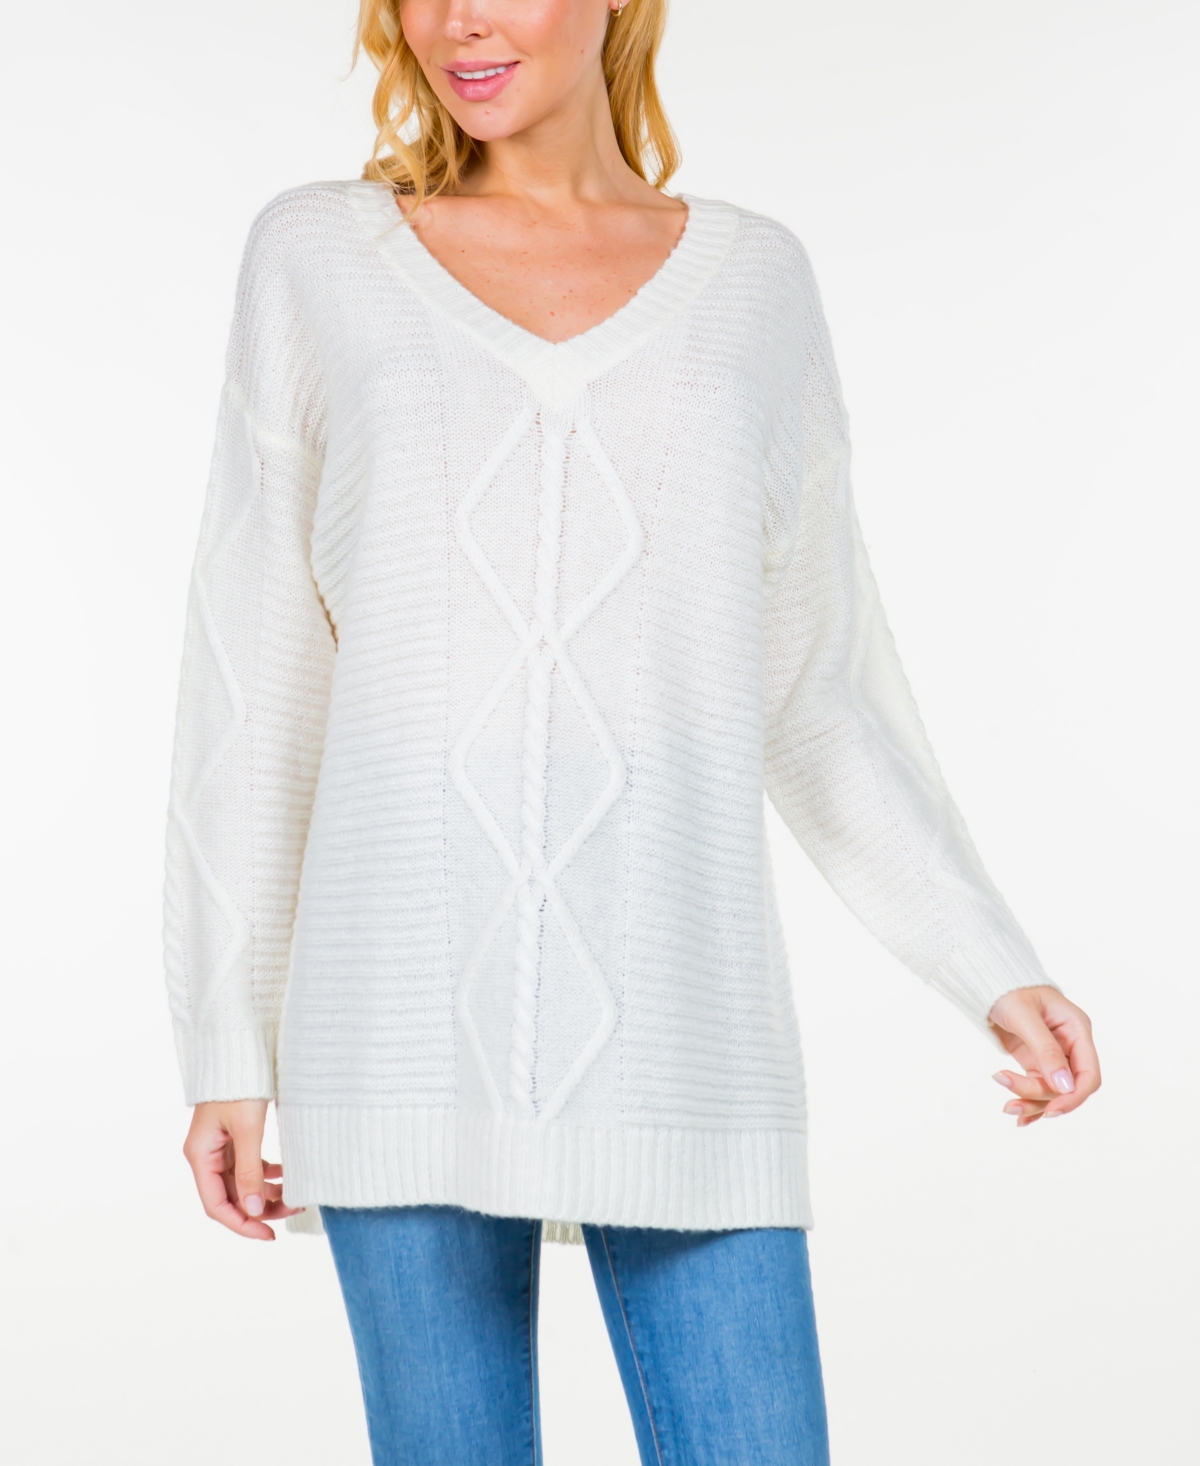 Fever Women's Rib and Cable Knit Long Sleeve V-Neck Sweater